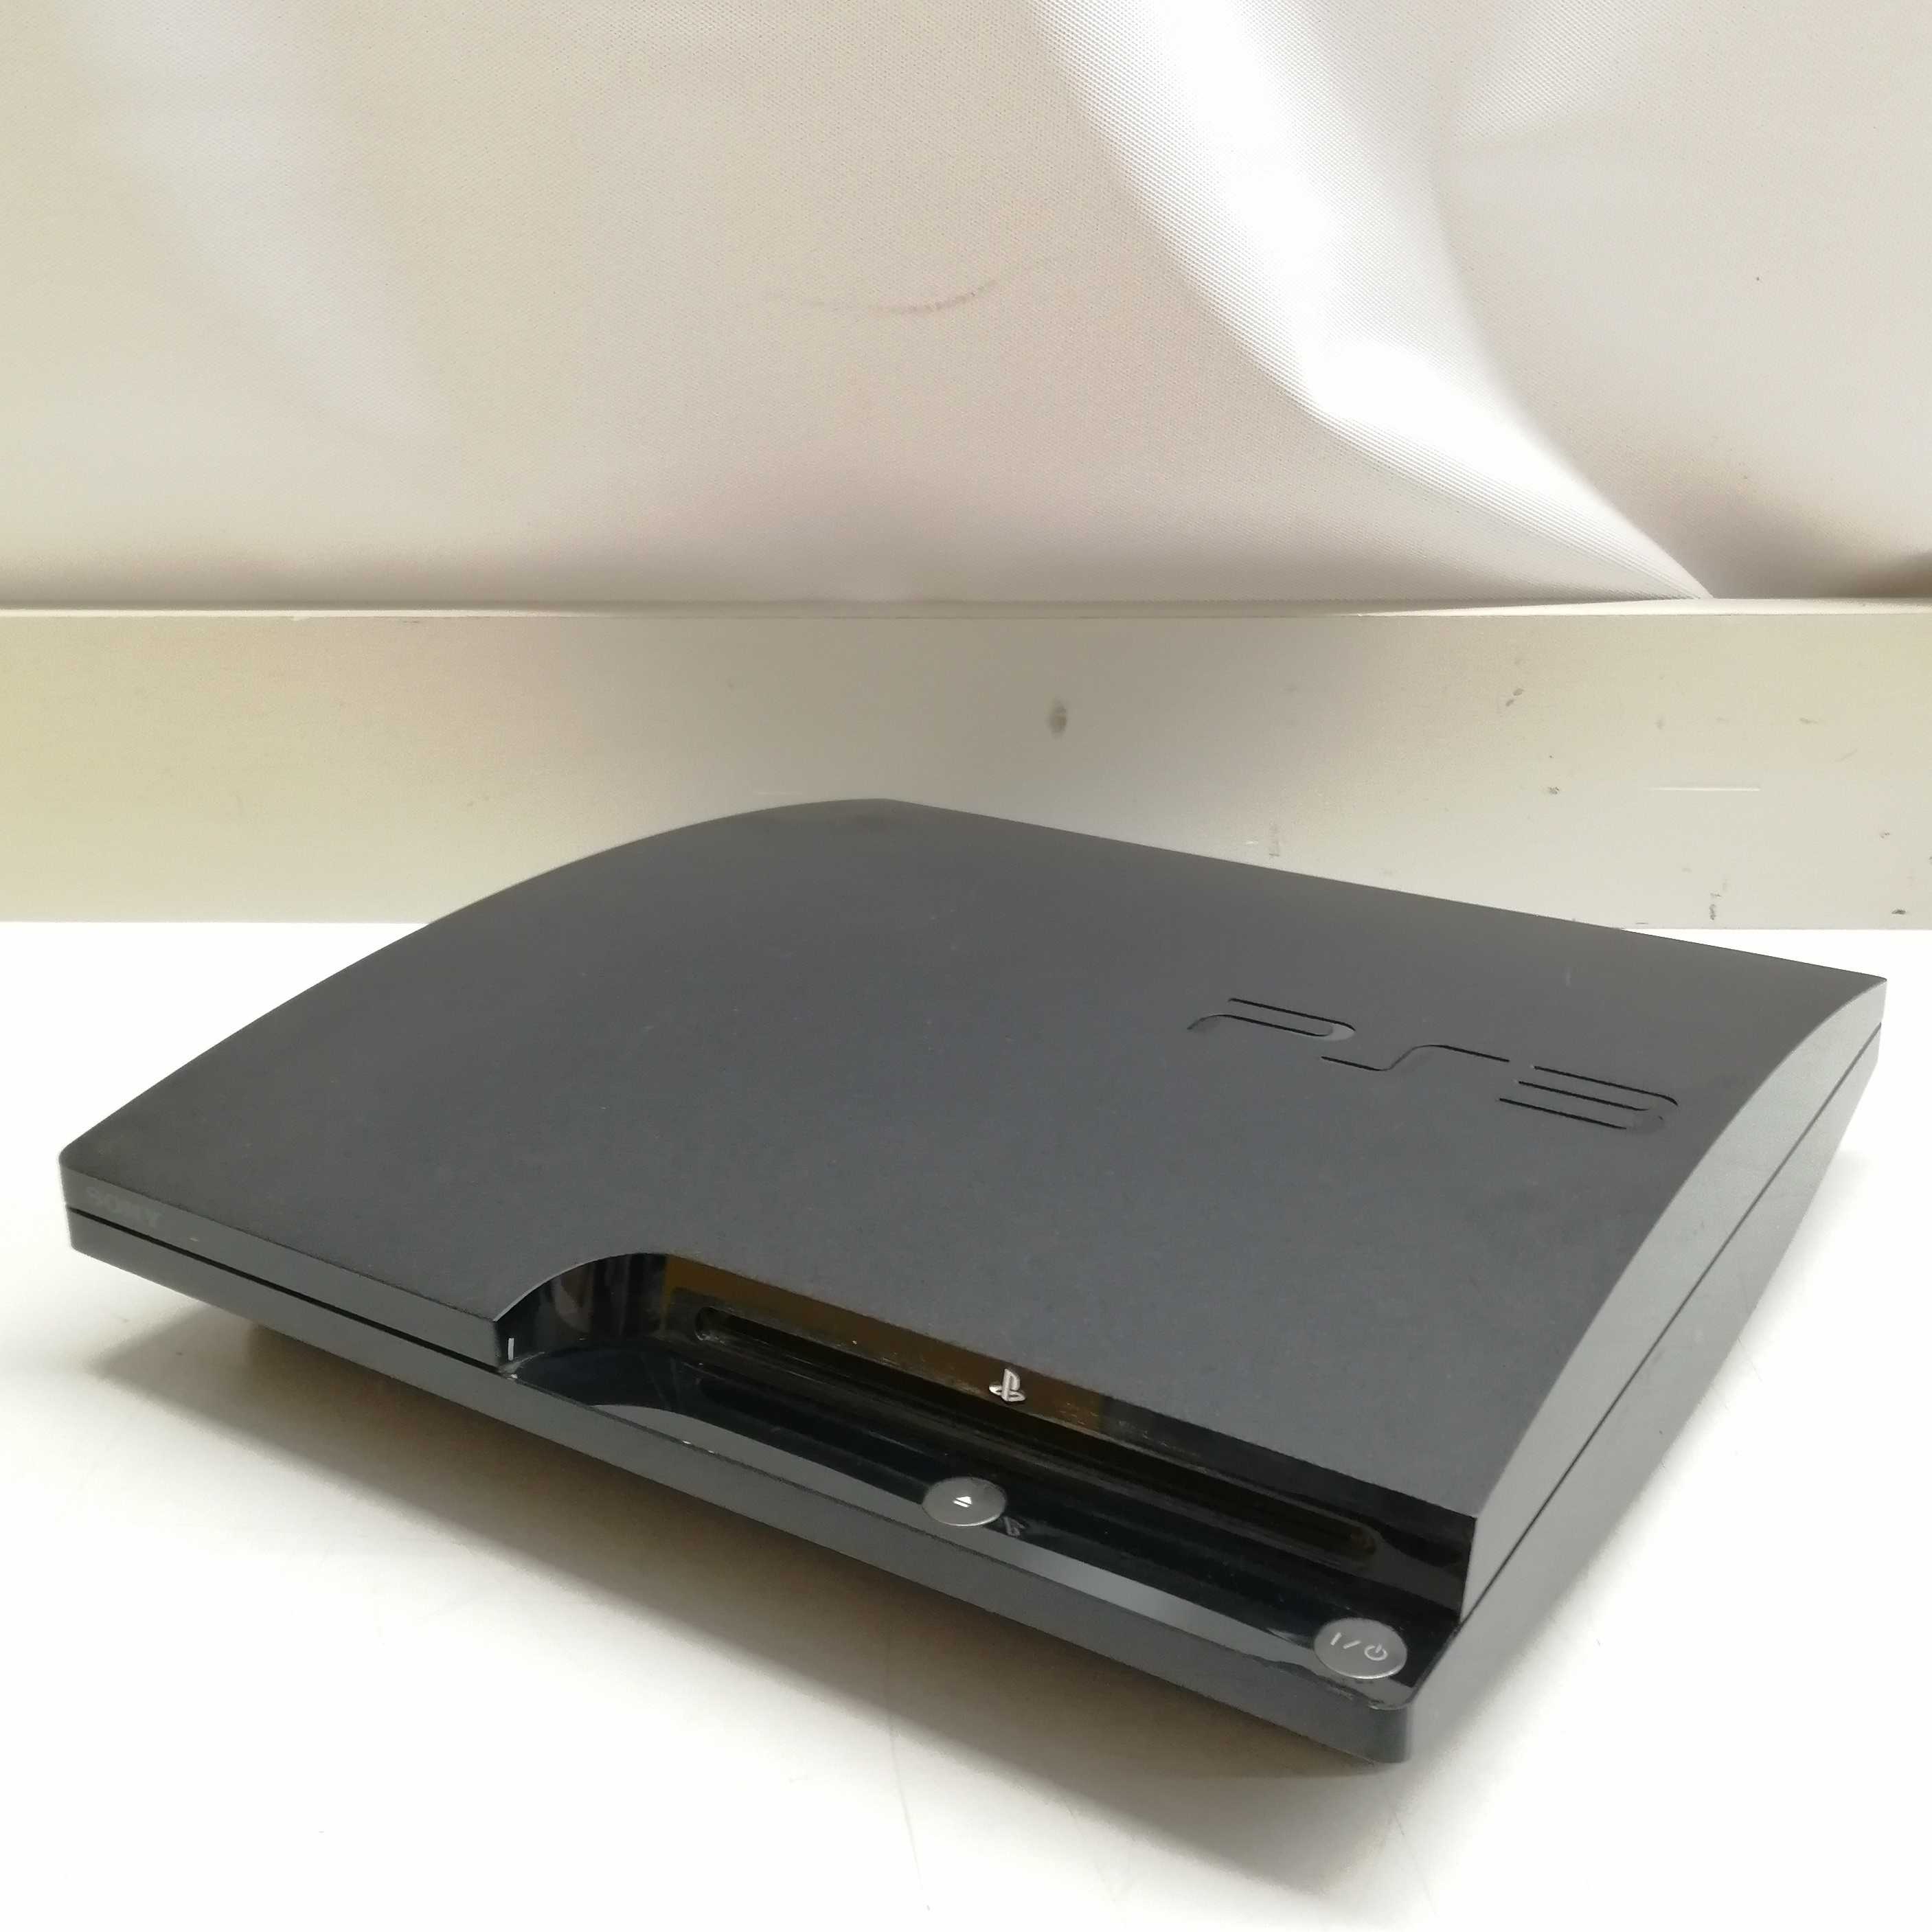 Buy PS3 SONY CECH-2000A game console body from Japan - Buy